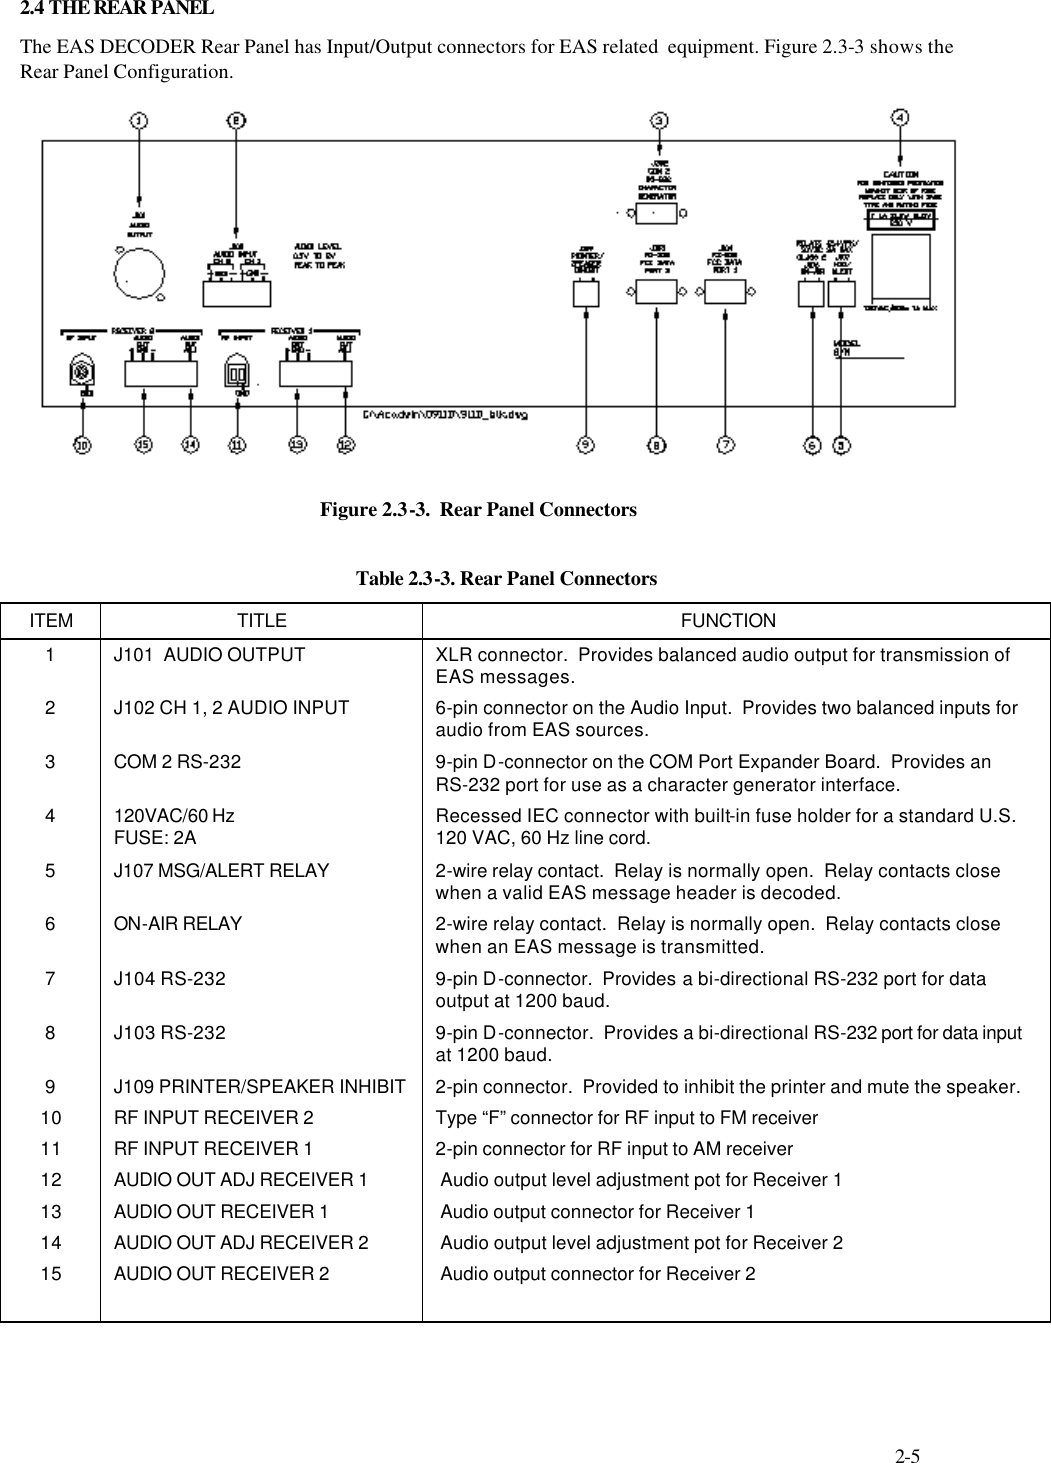     2-5 2.4 THE REAR PANEL The EAS DECODER Rear Panel has Input/Output connectors for EAS related  equipment. Figure 2.3-3 shows the Rear Panel Configuration.   Figure 2.3-3.  Rear Panel Connectors  Table 2.3-3. Rear Panel Connectors ITEM TITLE FUNCTION 1 J101  AUDIO OUTPUT XLR connector.  Provides balanced audio output for transmission of EAS messages. 2 J102 CH 1, 2 AUDIO INPUT 6-pin connector on the Audio Input.  Provides two balanced inputs for audio from EAS sources. 3 COM 2 RS-232    9-pin D-connector on the COM Port Expander Board.  Provides an RS-232 port for use as a character generator interface. 4 120VAC/60 Hz  FUSE: 2A Recessed IEC connector with built-in fuse holder for a standard U.S. 120 VAC, 60 Hz line cord. 5 J107 MSG/ALERT RELAY 2-wire relay contact.  Relay is normally open.  Relay contacts close when a valid EAS message header is decoded. 6 ON-AIR RELAY 2-wire relay contact.  Relay is normally open.  Relay contacts close when an EAS message is transmitted. 7 J104 RS-232 9-pin D-connector.  Provides a bi-directional RS-232 port for data output at 1200 baud.  8 J103 RS-232 9-pin D-connector.  Provides a bi-directional RS-232 port for data input at 1200 baud.  9 J109 PRINTER/SPEAKER INHIBIT 2-pin connector.  Provided to inhibit the printer and mute the speaker. 10 RF INPUT RECEIVER 2 Type “F” connector for RF input to FM receiver 11 RF INPUT RECEIVER 1 2-pin connector for RF input to AM receiver 12 AUDIO OUT ADJ RECEIVER 1  Audio output level adjustment pot for Receiver 1 13 AUDIO OUT RECEIVER 1   Audio output connector for Receiver 1 14 AUDIO OUT ADJ RECEIVER 2  Audio output level adjustment pot for Receiver 2 15 AUDIO OUT RECEIVER 2  Audio output connector for Receiver 2       